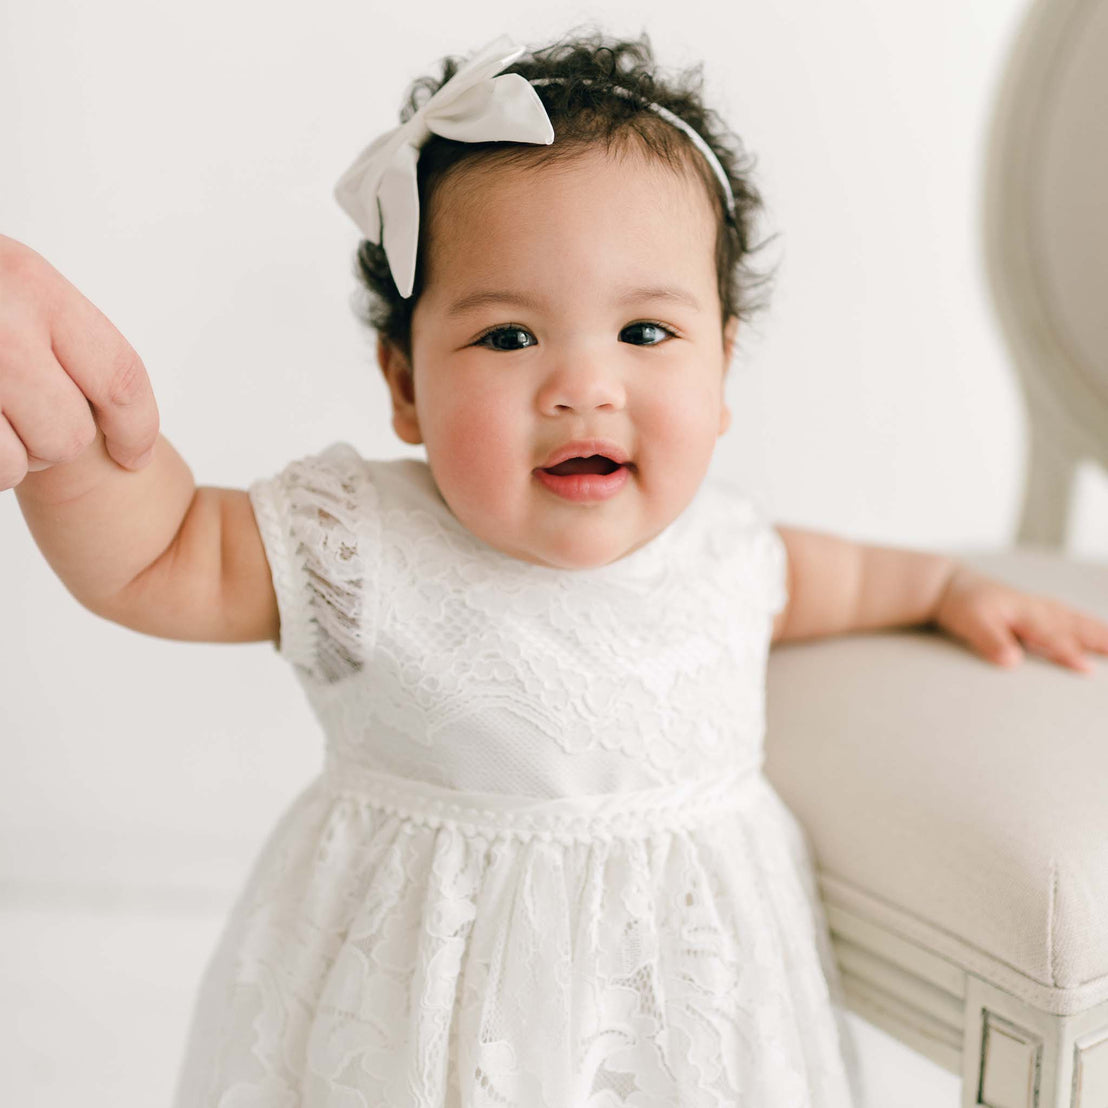 A baby wearing the Victoria Puff Sleeve Christening Dress is standing with support. The baby's right hand is holding onto an adult’s hand, while their left hand rests on a chair. The background is plain and light-colored.